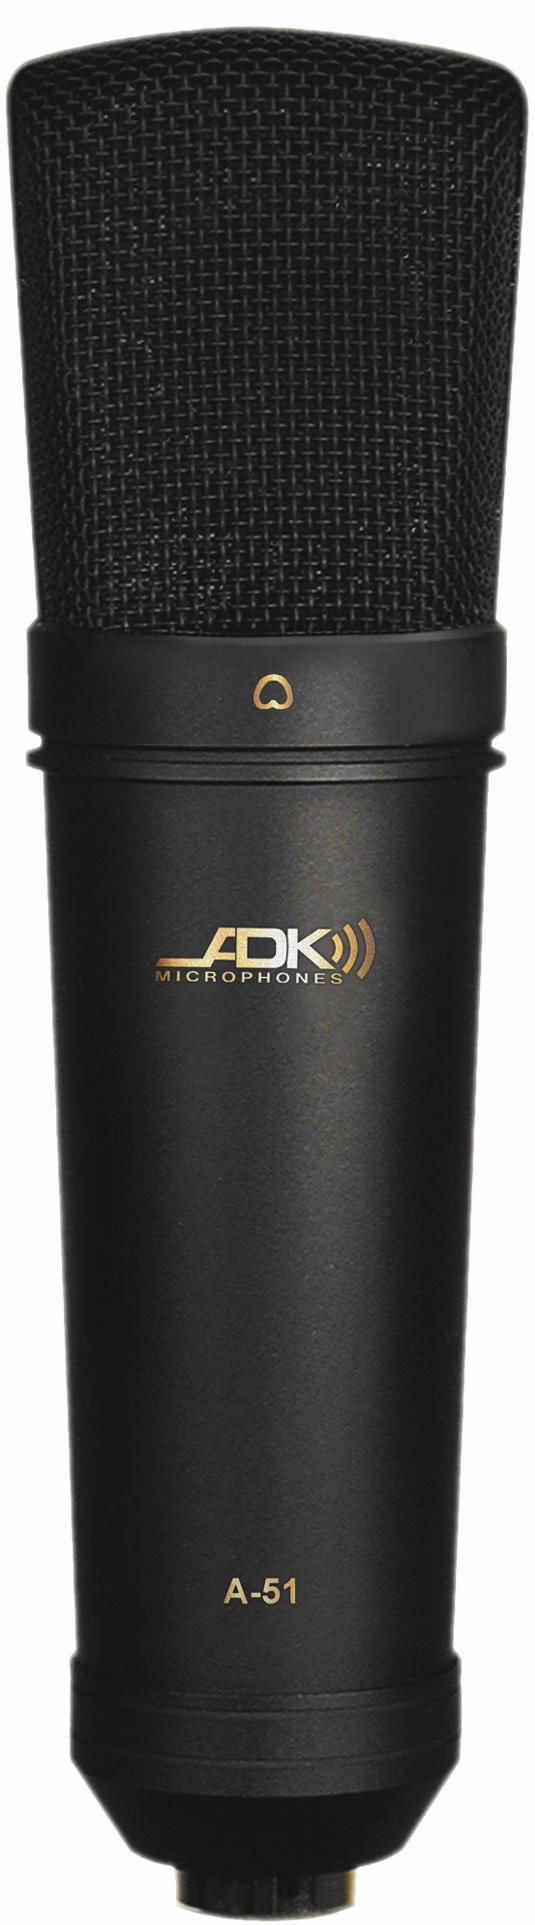 ADK A-51 Mk 5.1 SPECIFICATIONS Sensitivity: 15mv/Pa S/N Ratio: 77dB (Ref: 1 Pa / A-Weighted) Equivalent Self-Noise: 17dB (A-Weighted / IEC 268-4) Max SPL @ 0.